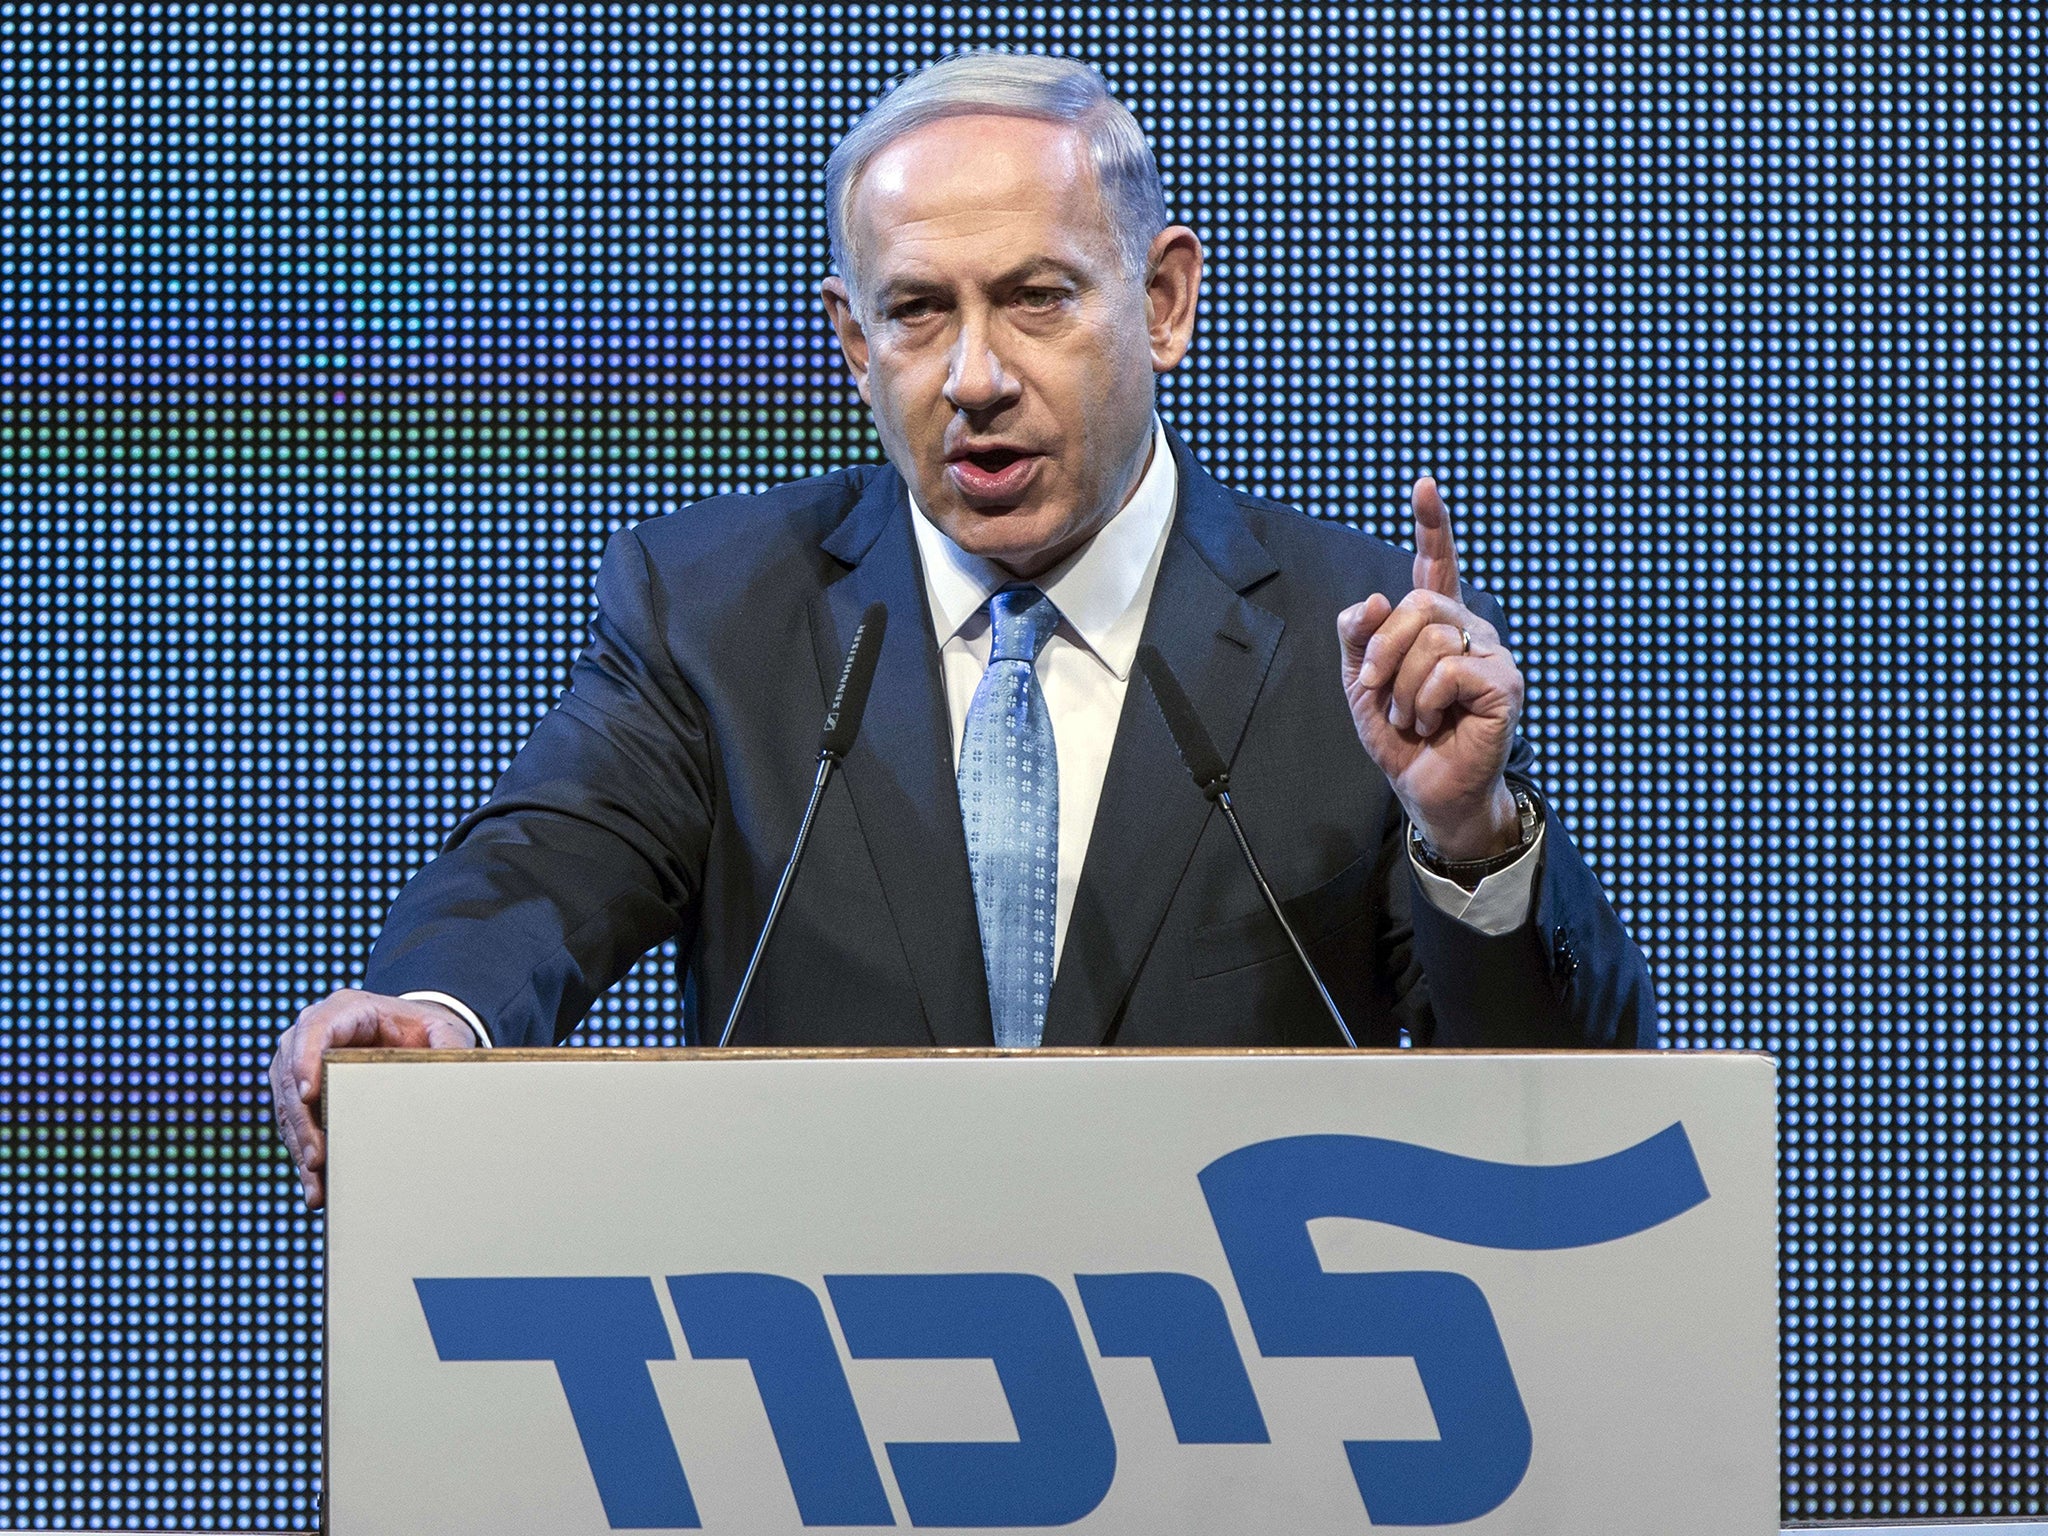 Benjamin Netanyahu is seen to be vulnerable if socio-economic issues dominate the campaign